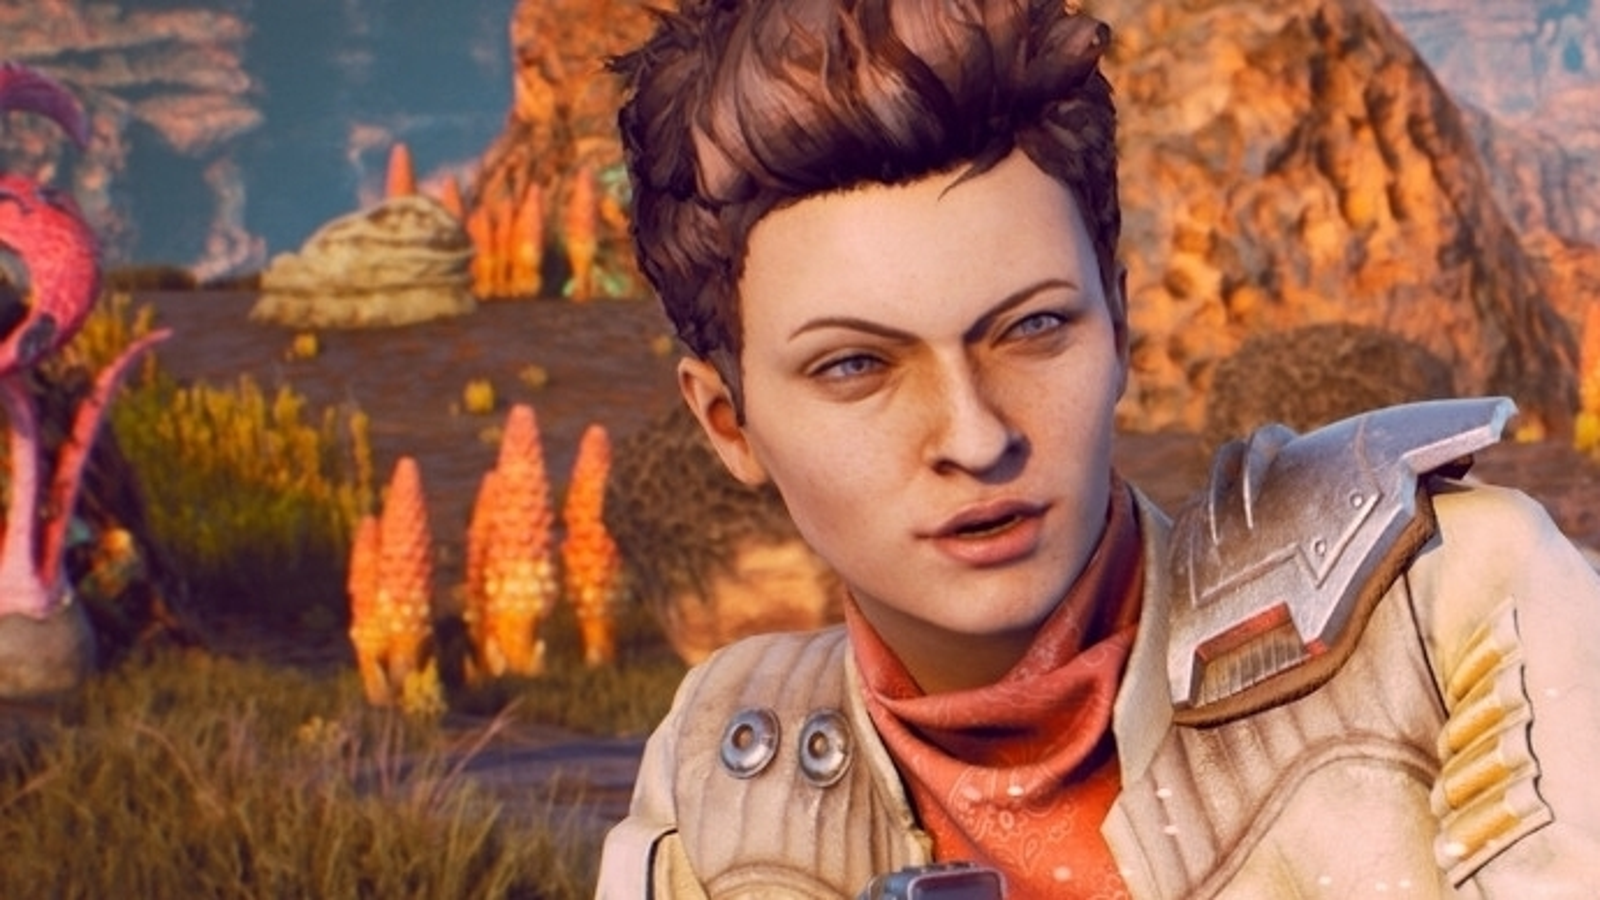 The Outer Worlds 2 Rumored To Be In The Works - Game Informer